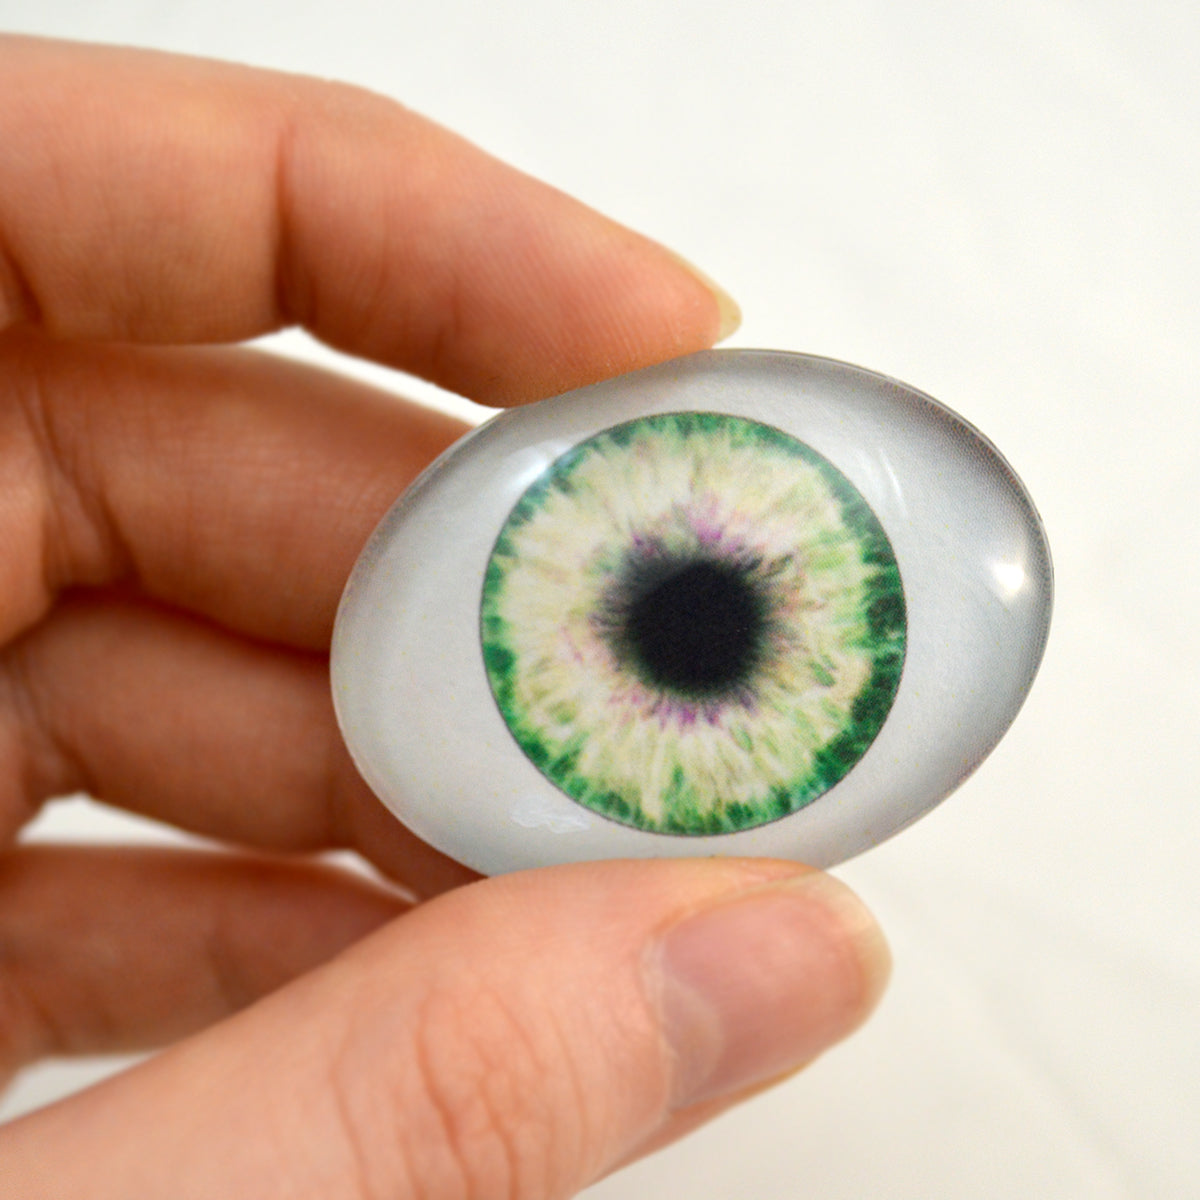 Glass Eyes for Dolls with Loops 16mm Green Iris Pupils Glass Eye Cabochons  for Fantasy Art Doll Stuffed Animal Soft Sculptures or Jewelry Making